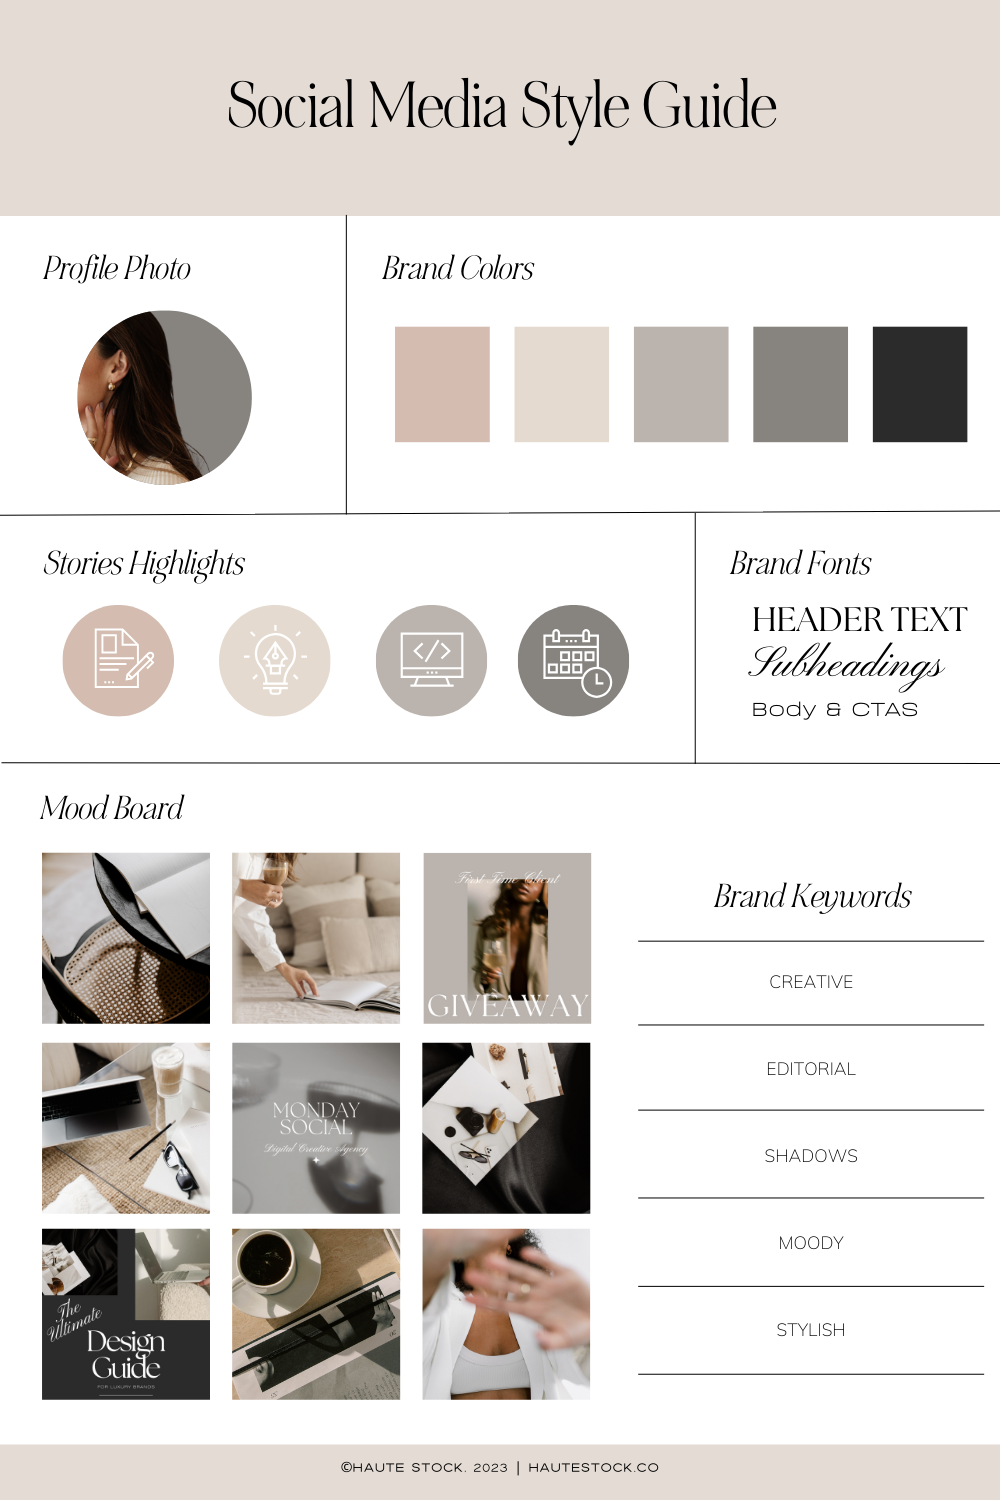 Style guide image featuring a brand's cohesive colors, fonts, and images.